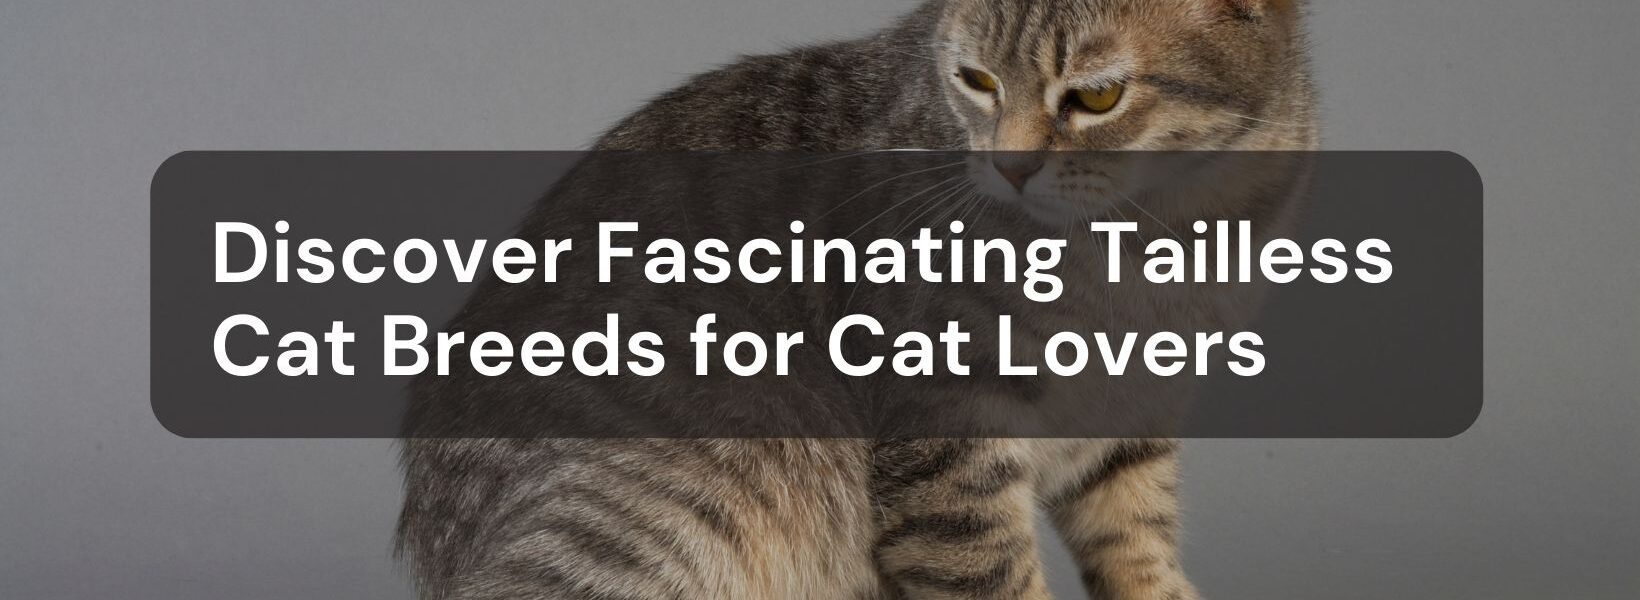 cat breeds with no tail